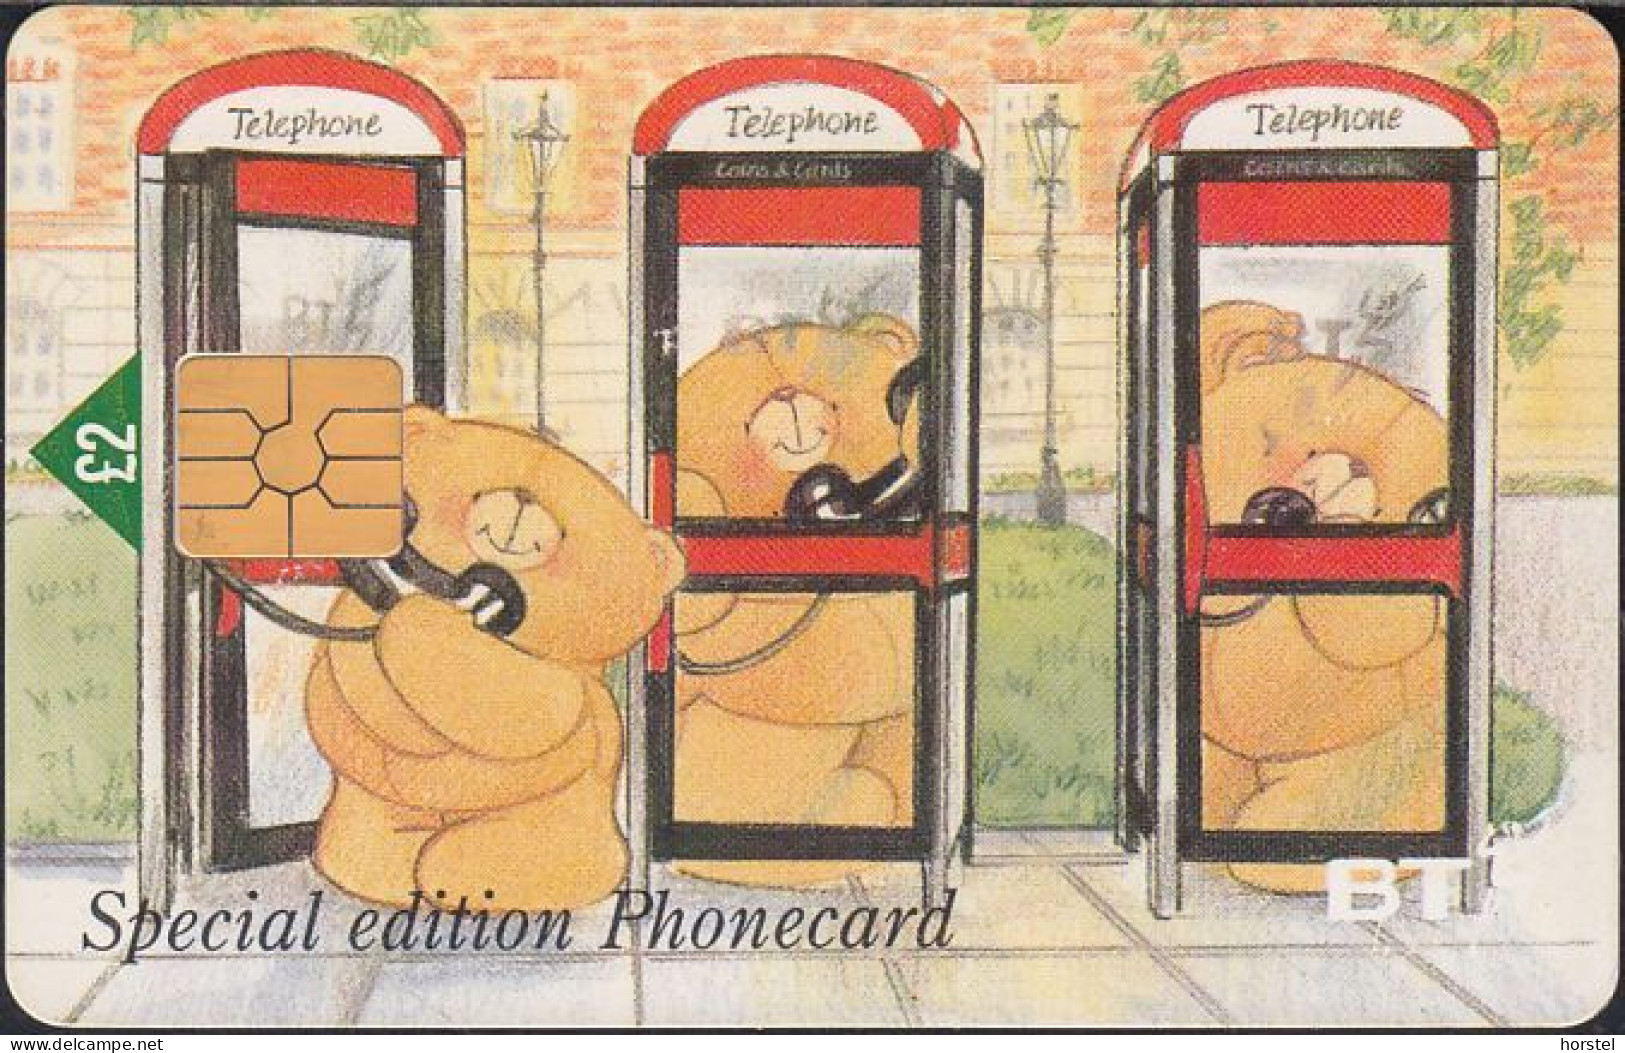 UK - British Telecom Chip PUB046  - £2  Phone Box - Bear - Forever Friends - "Let's Keep In Touch" - GEM - BT Promotional